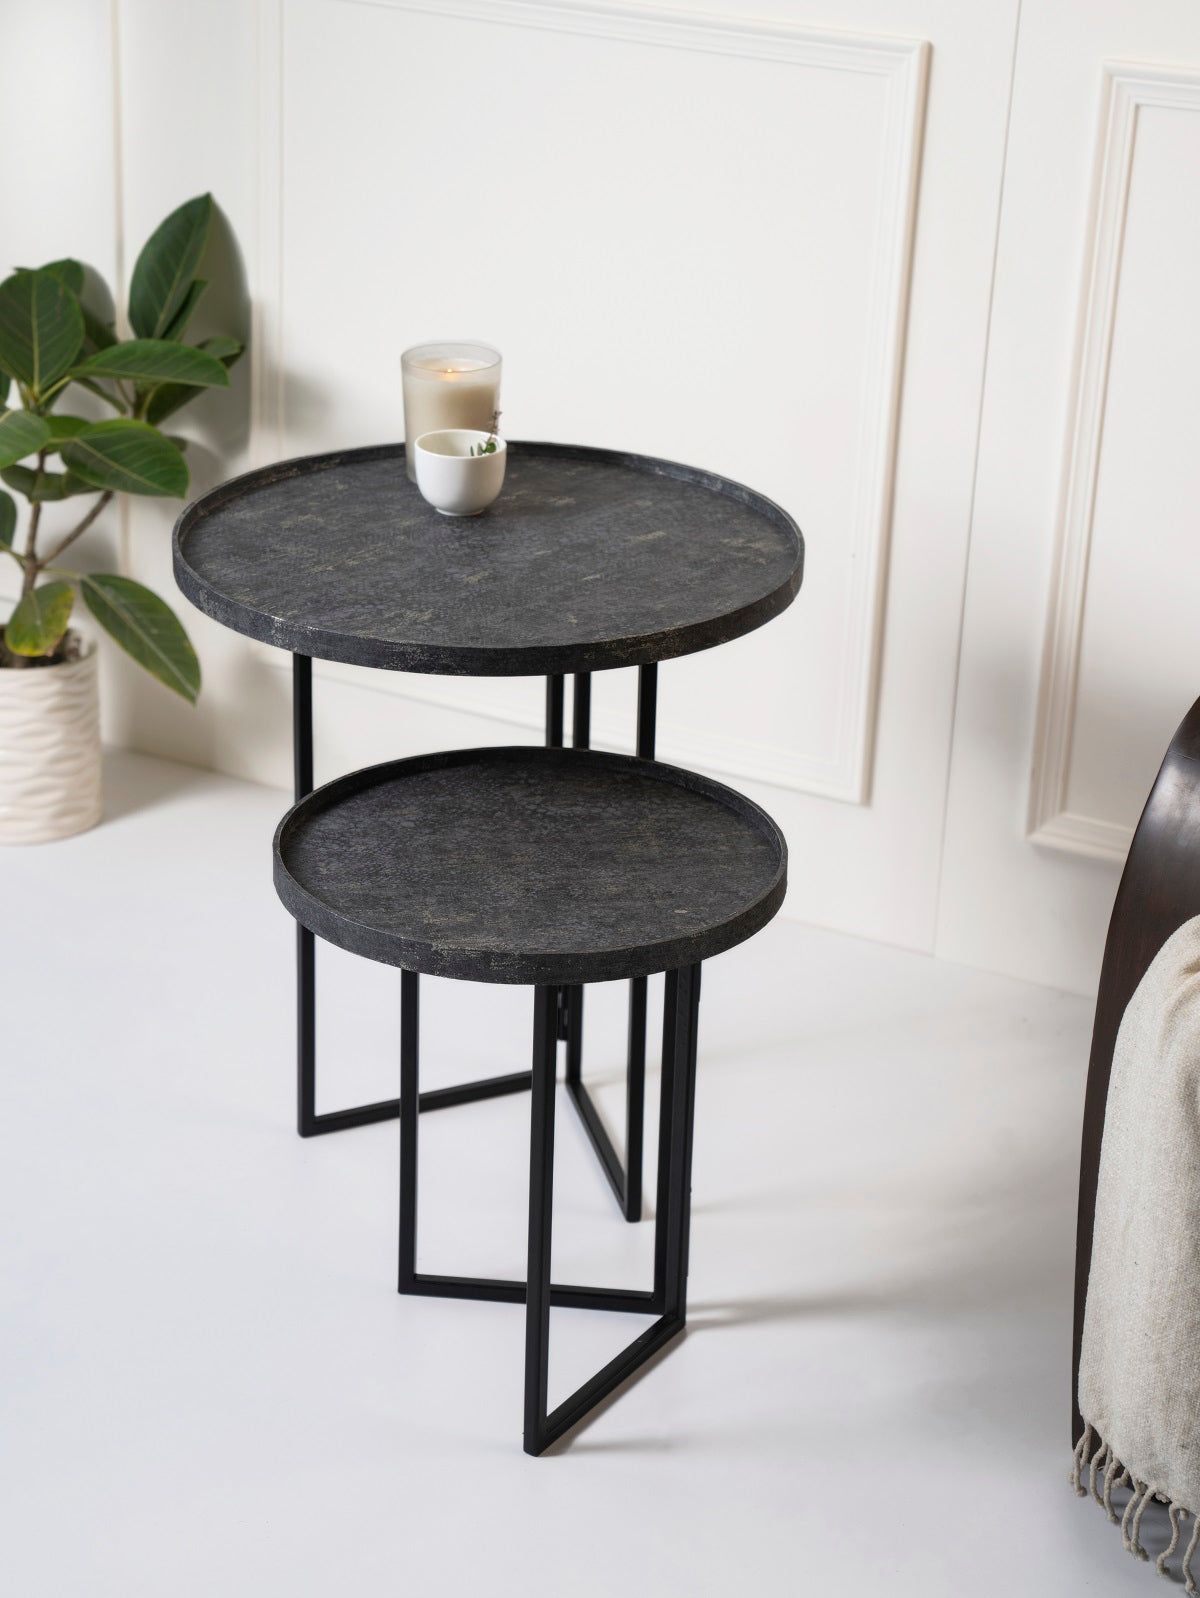 Transcendent Tinge Dark Blue Round Oblique Nesting Tables, Side Tables, Wooden Tables, Living Room Decor by A Tiny Mistake